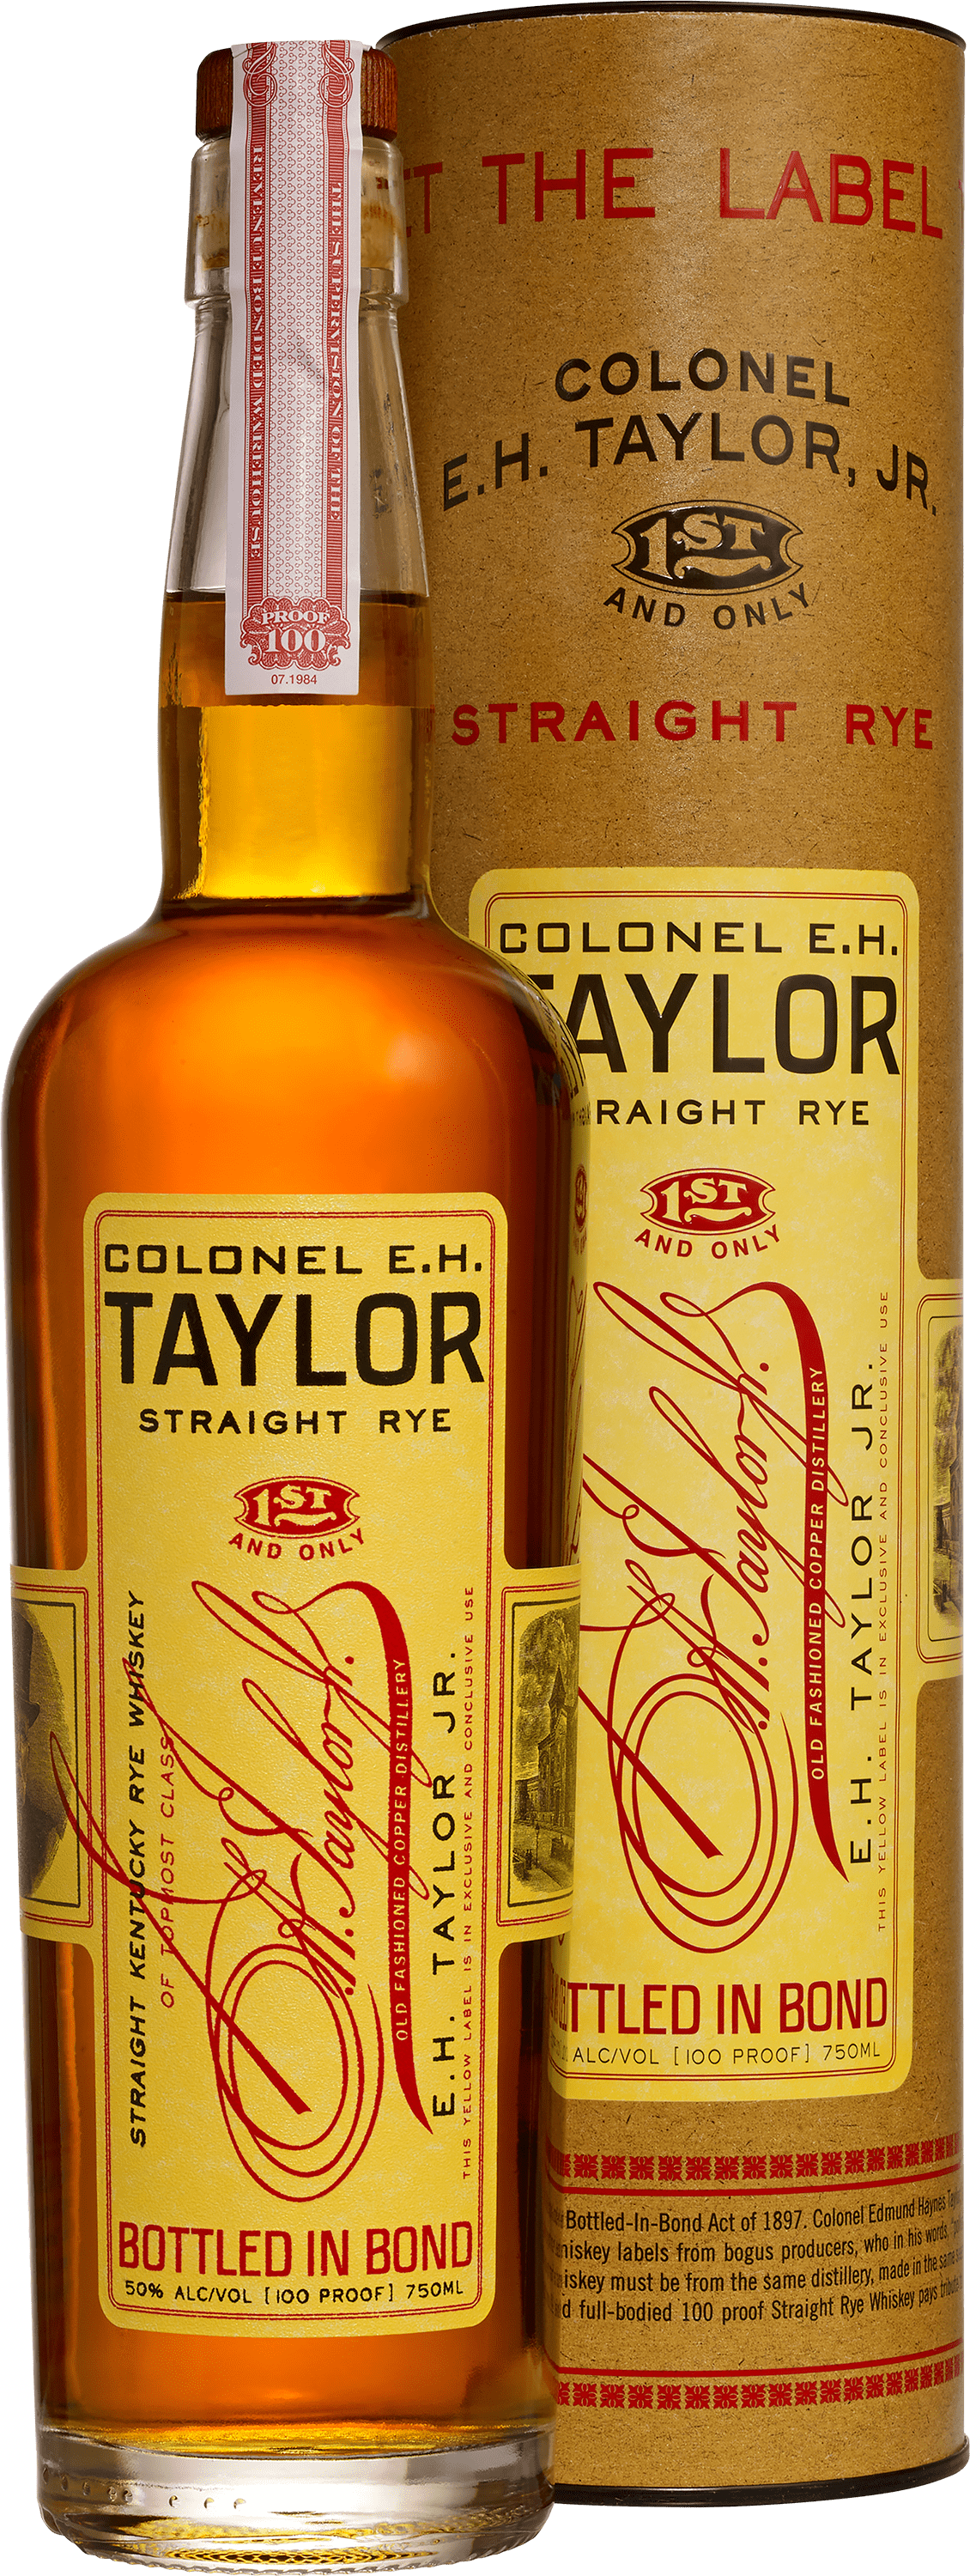 E.H. Taylor, Jr. Straight Rye 750 ml bottle with Canister